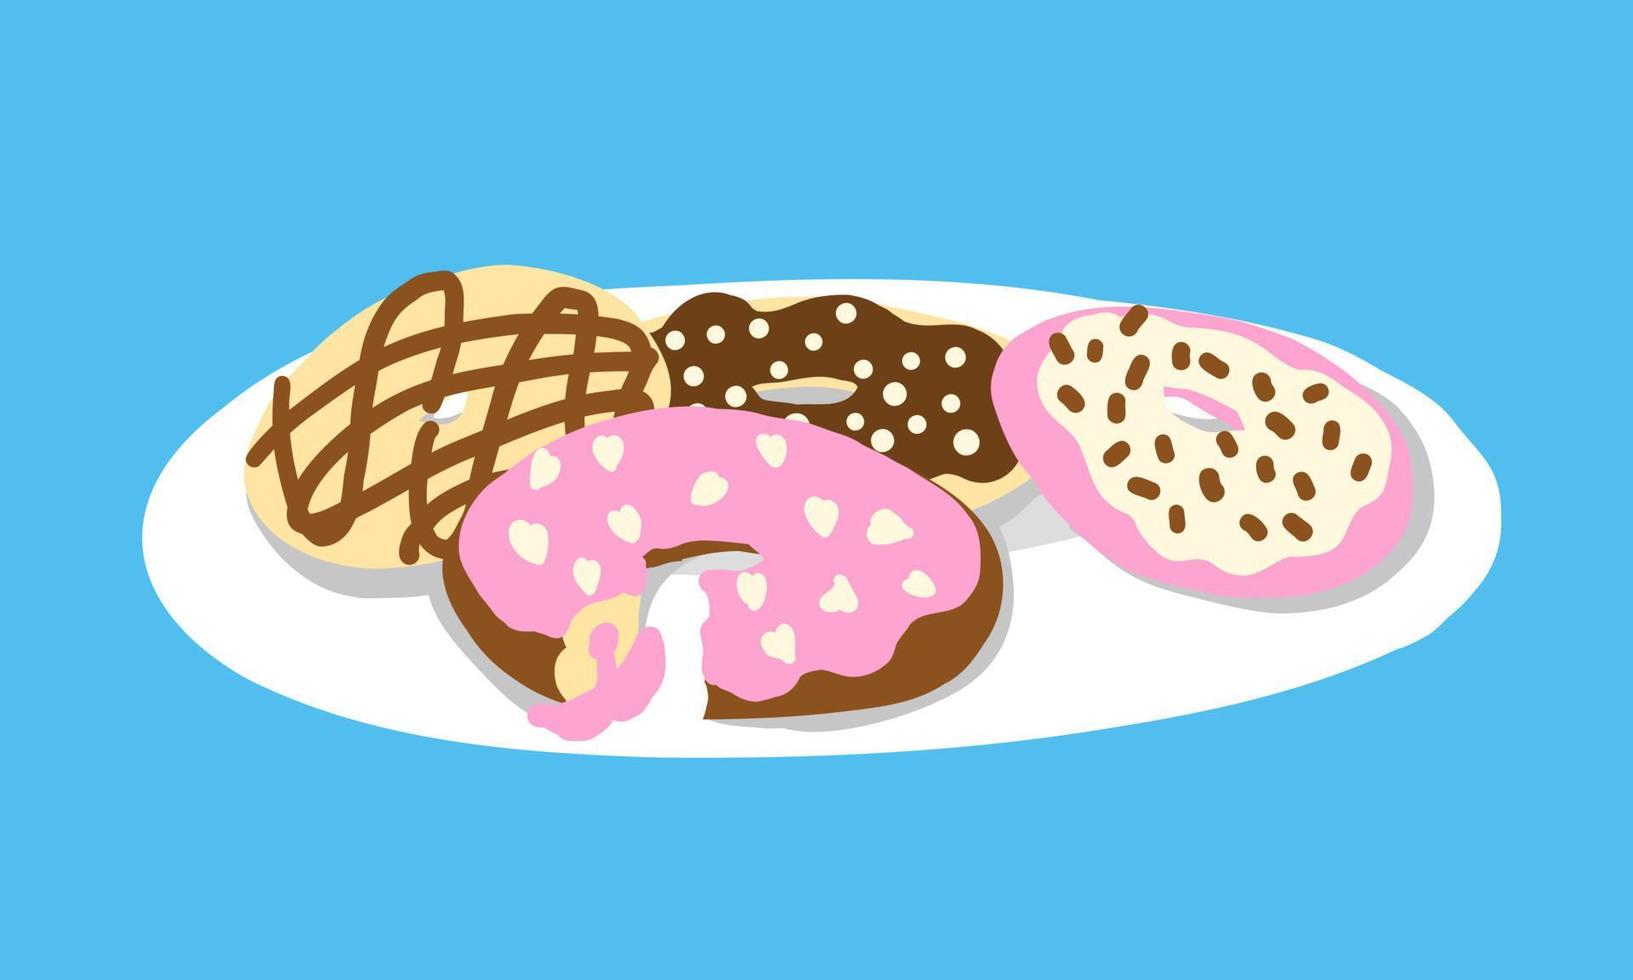 A plate of donuts in cartoon style. Vector illustration isolated on blue background.